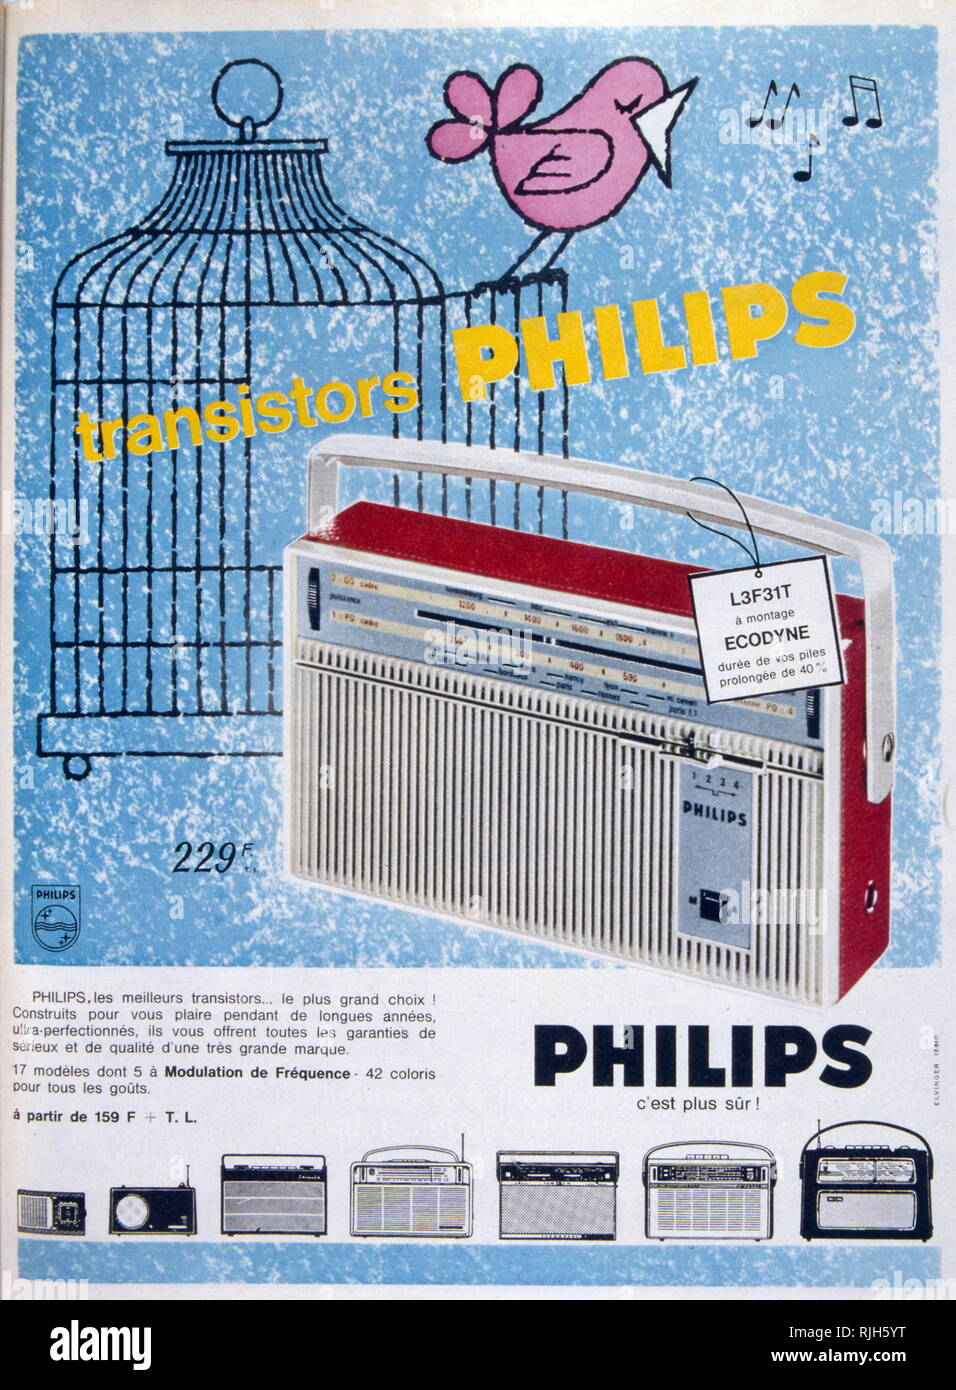 French advert for transistor radios, by Philips 1963 Stock Photo